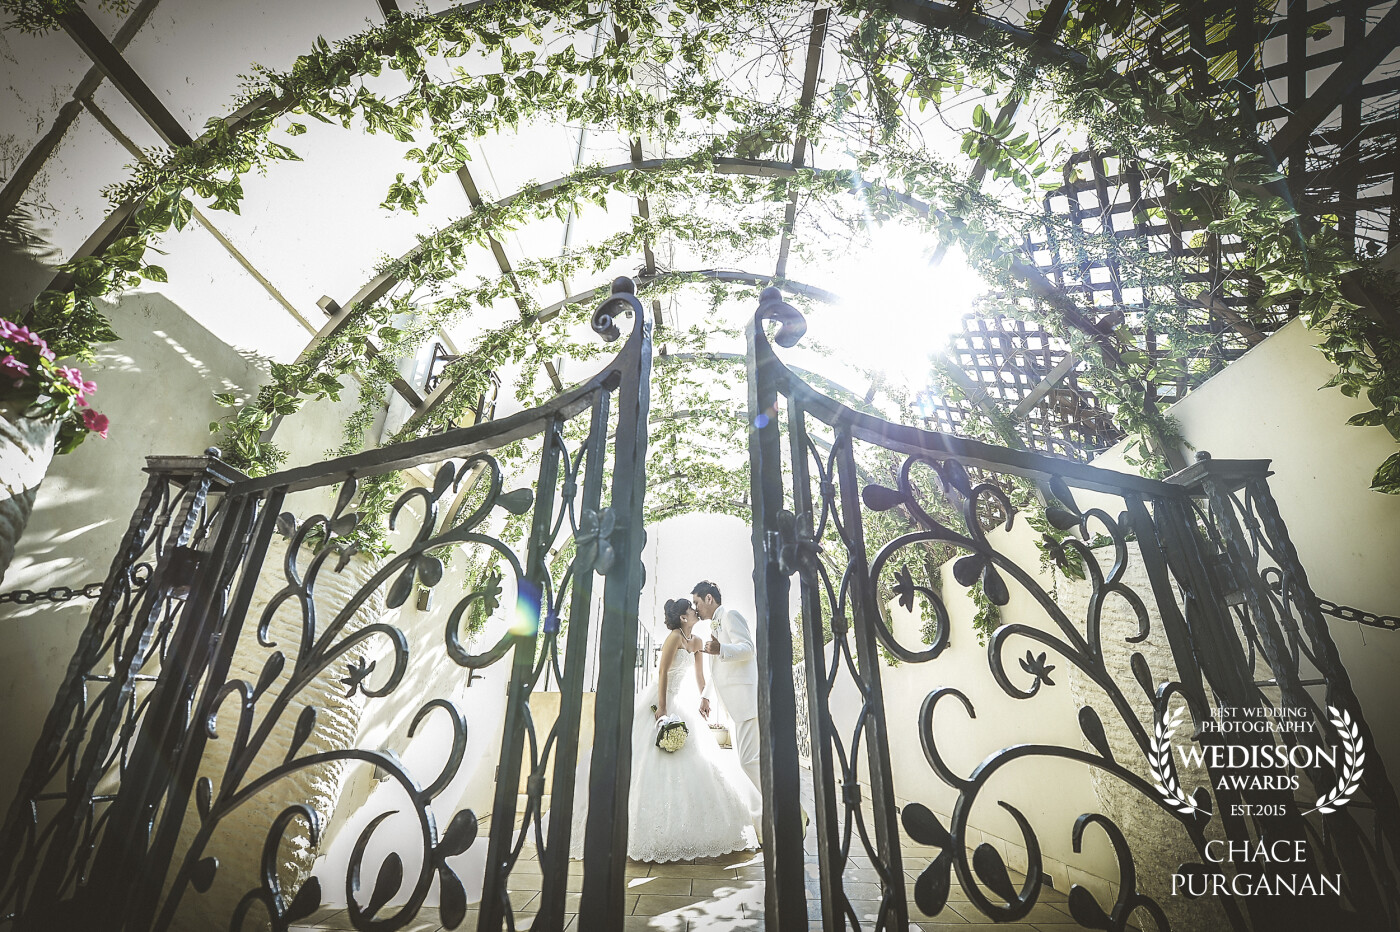 Sneaking a kiss and a "Shaka" in the secret garden. A beautiful moment taken outside the chapel after a lovely ceremony on a sunny day in Hawaii.